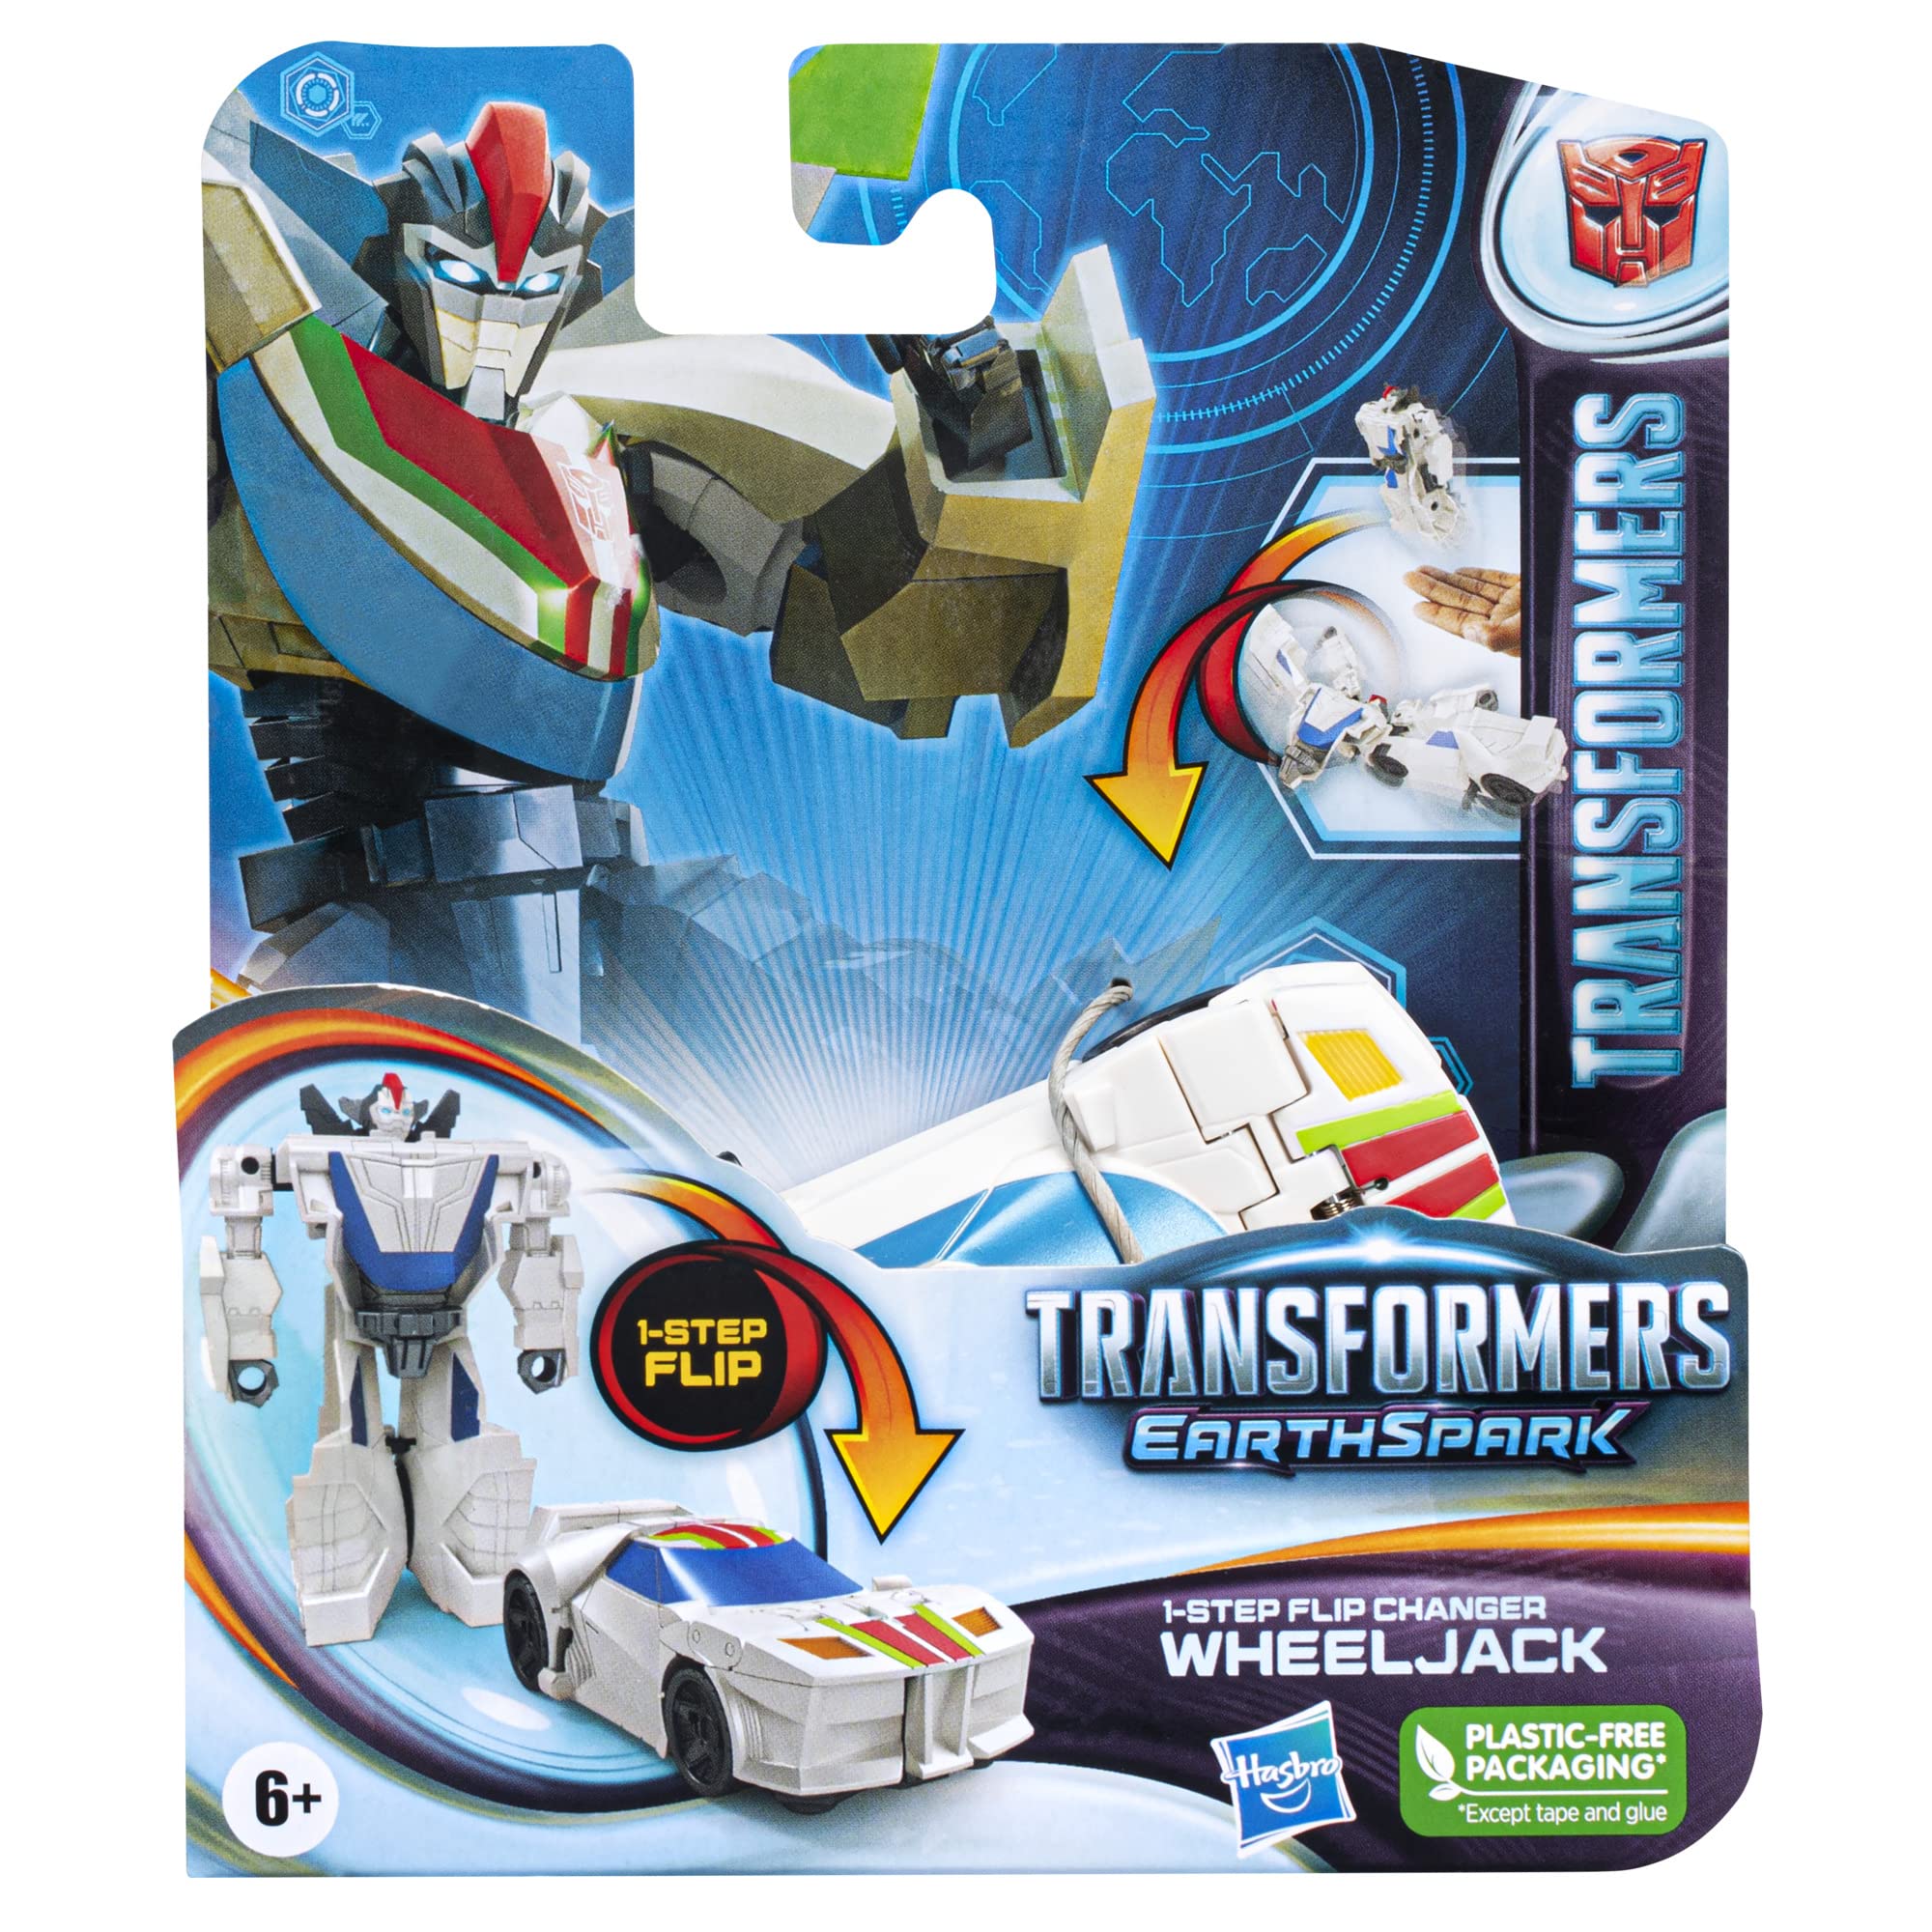 Transformers Toys EarthSpark 1-Step Flip Changer Wheeljack 4-Inch Action Figure, Robot Toys for Ages 6 and Up